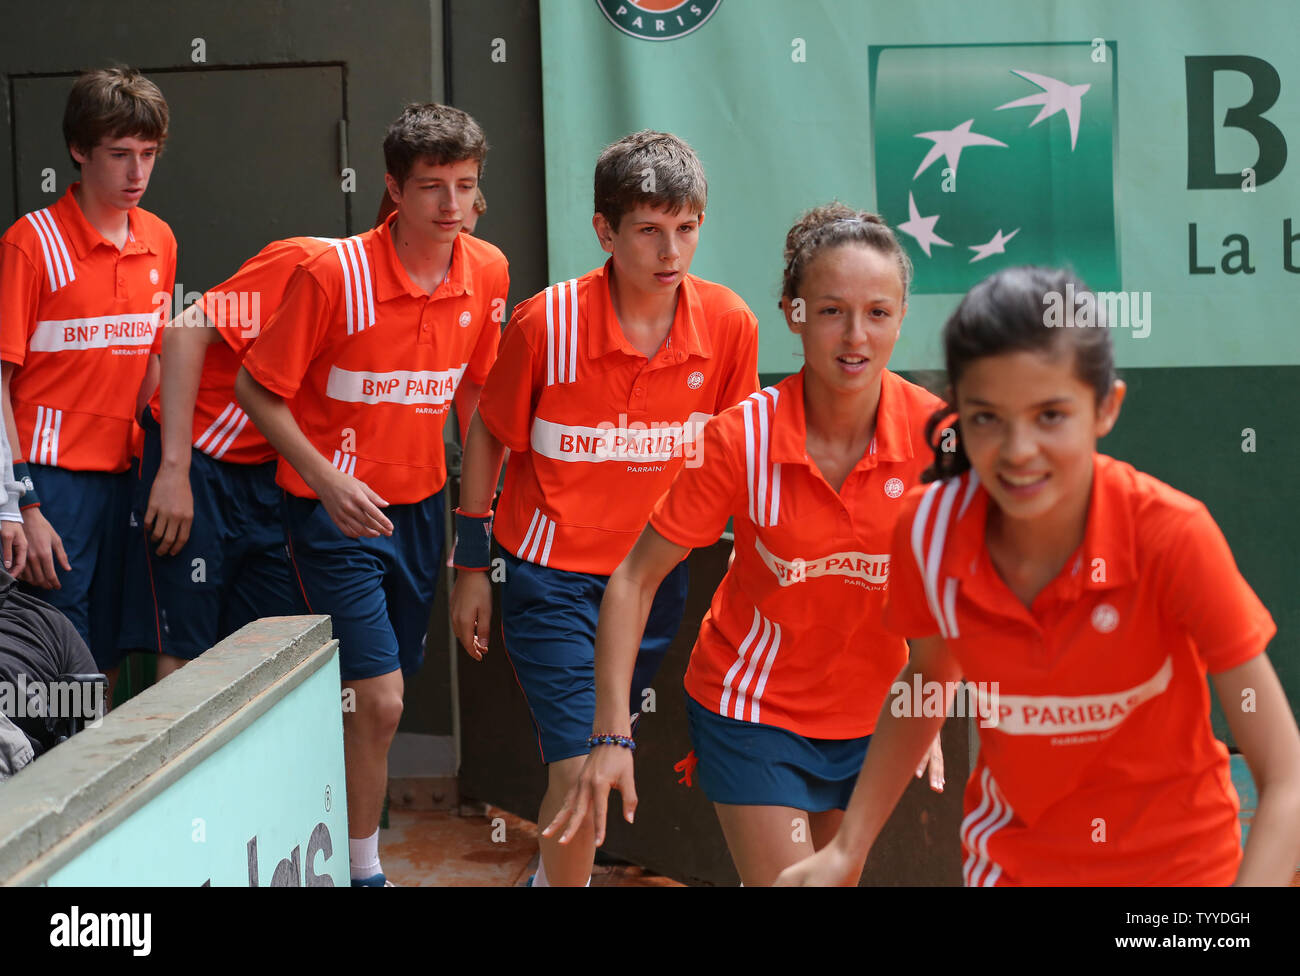 Ball Boys And Girls Enter The Court During The French Open Mens Second Round Match Between Spaniard Nicolas Almagro And Marcos Baghdatis Of Cyprus At Roland Garros In Paris On May 31